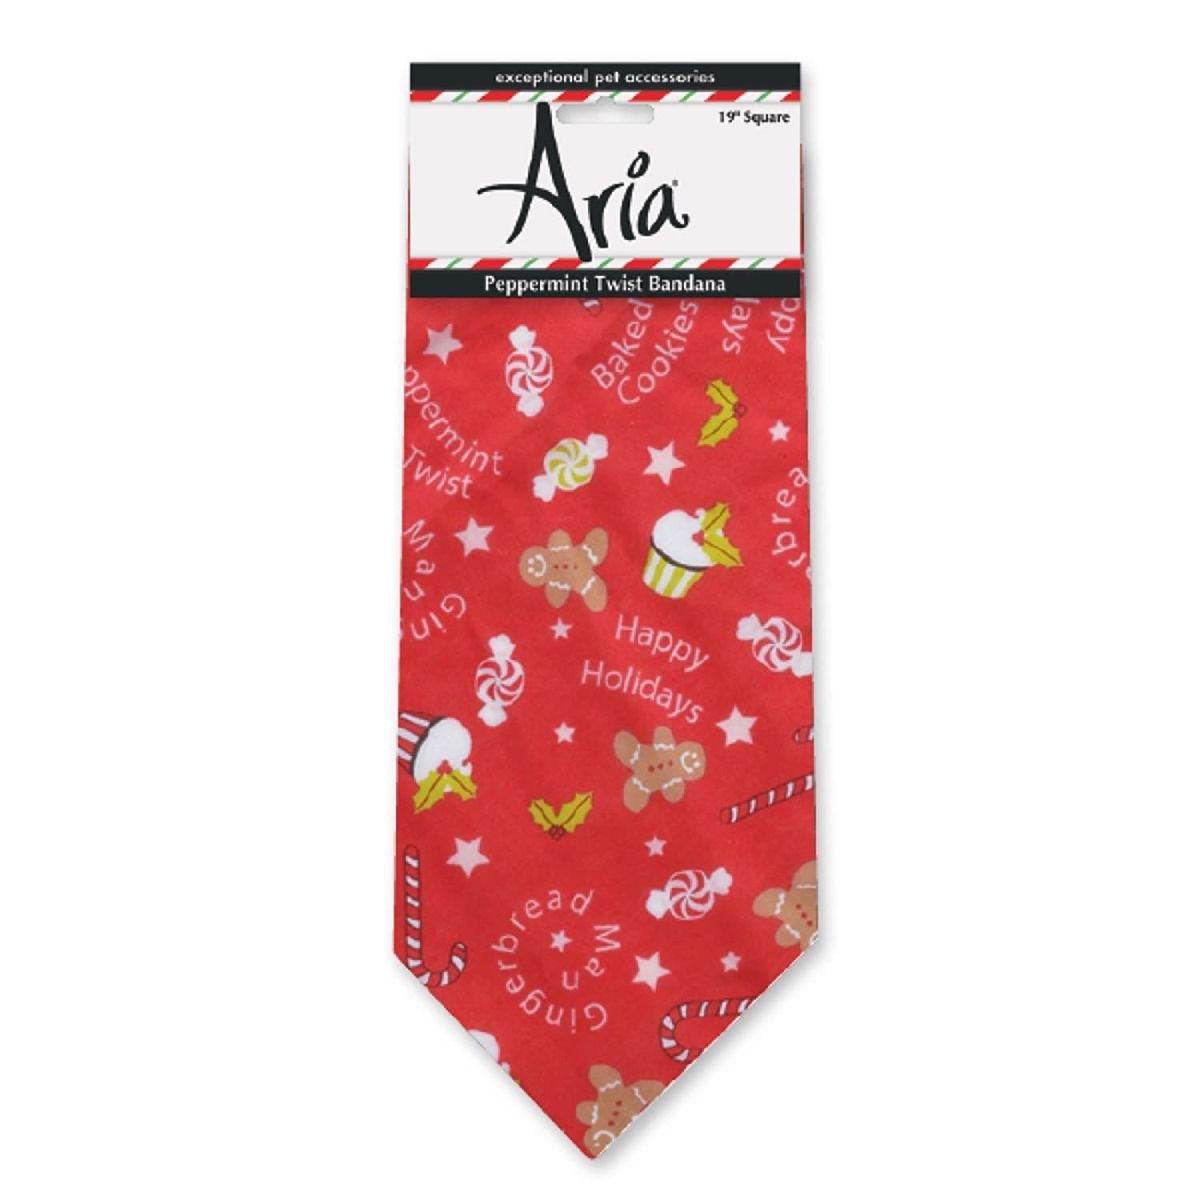 Picture of Aria DT1067 55 Peppermint Twist Bandana